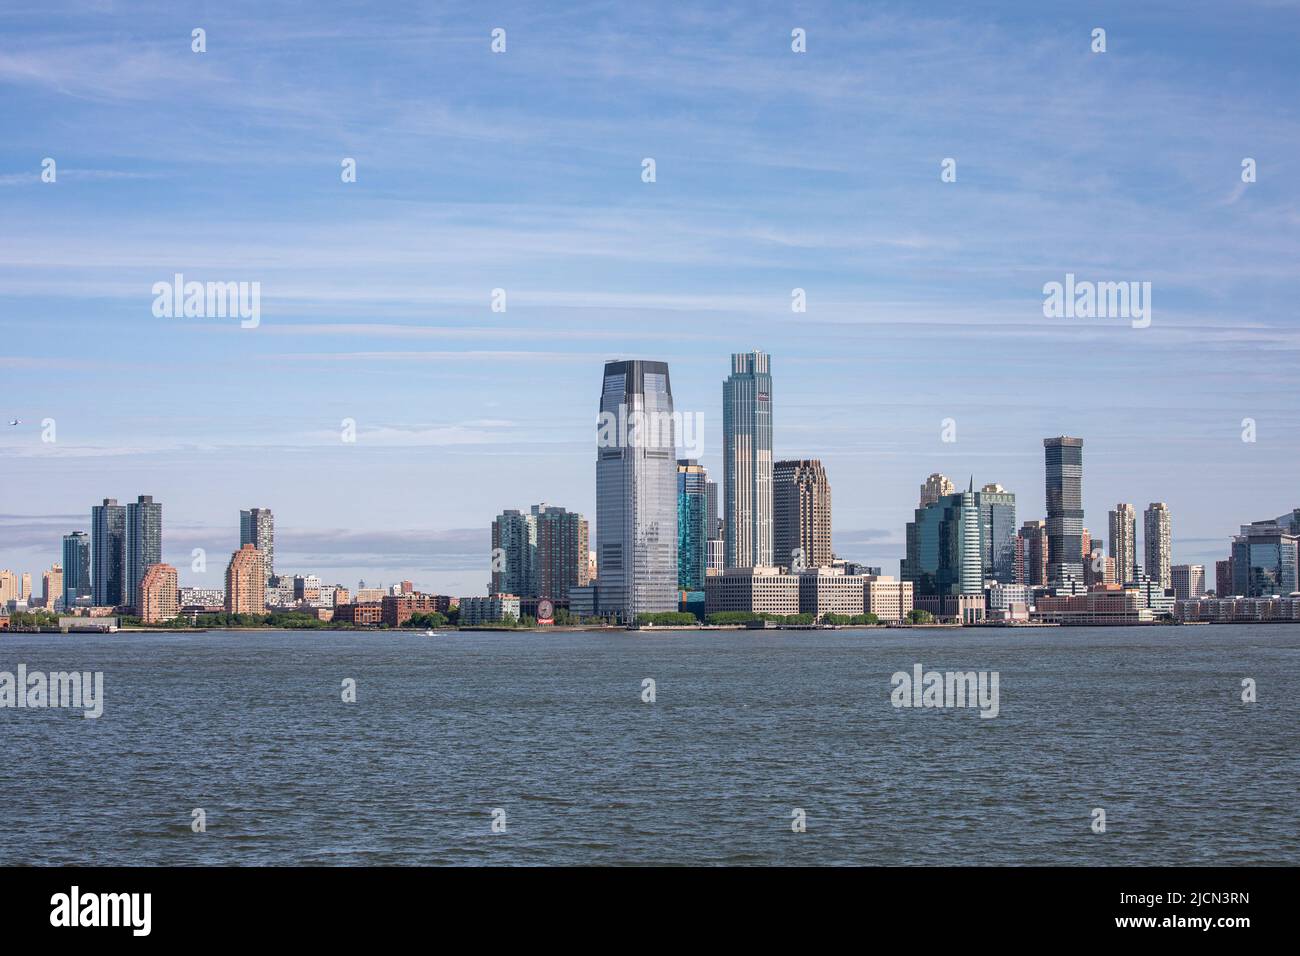 Jersey City skyline with high-rise buildings in Jersey City, New Jersey, United States of America Stock Photo